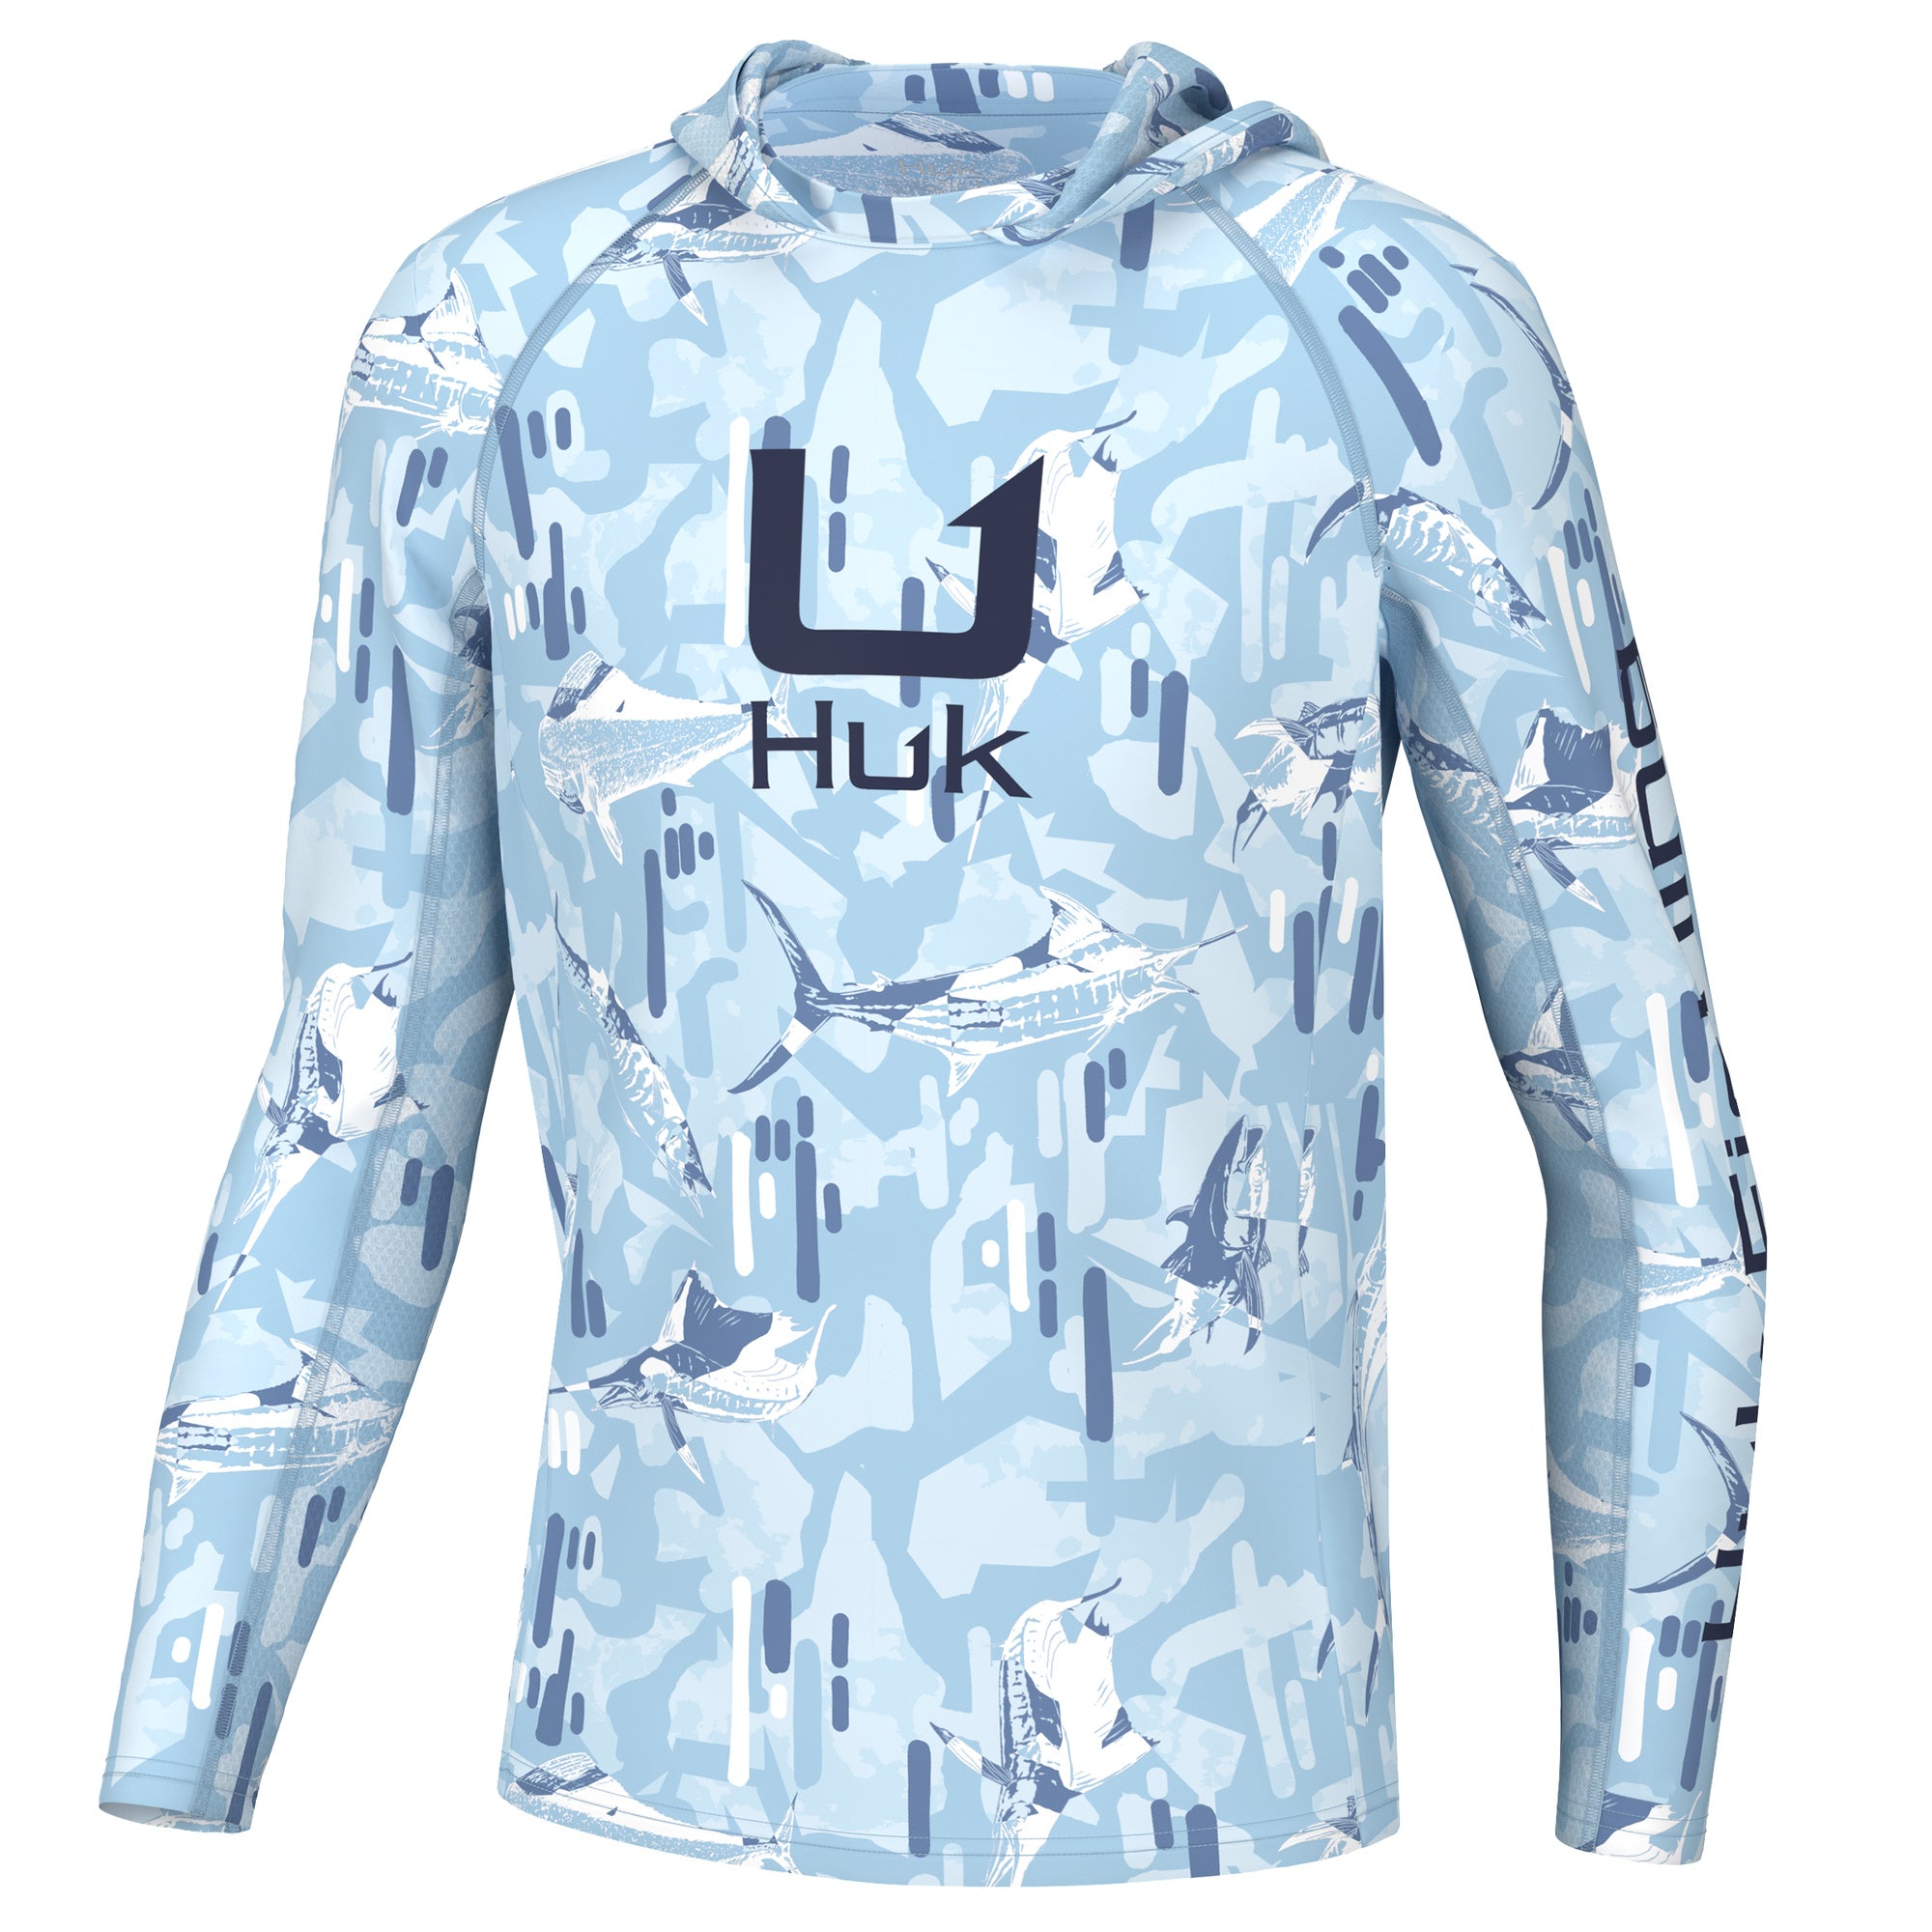 HUK Kids' Icon X Hoodie Long-Sleeve Shirt with Sun Protection, White,  X-Small